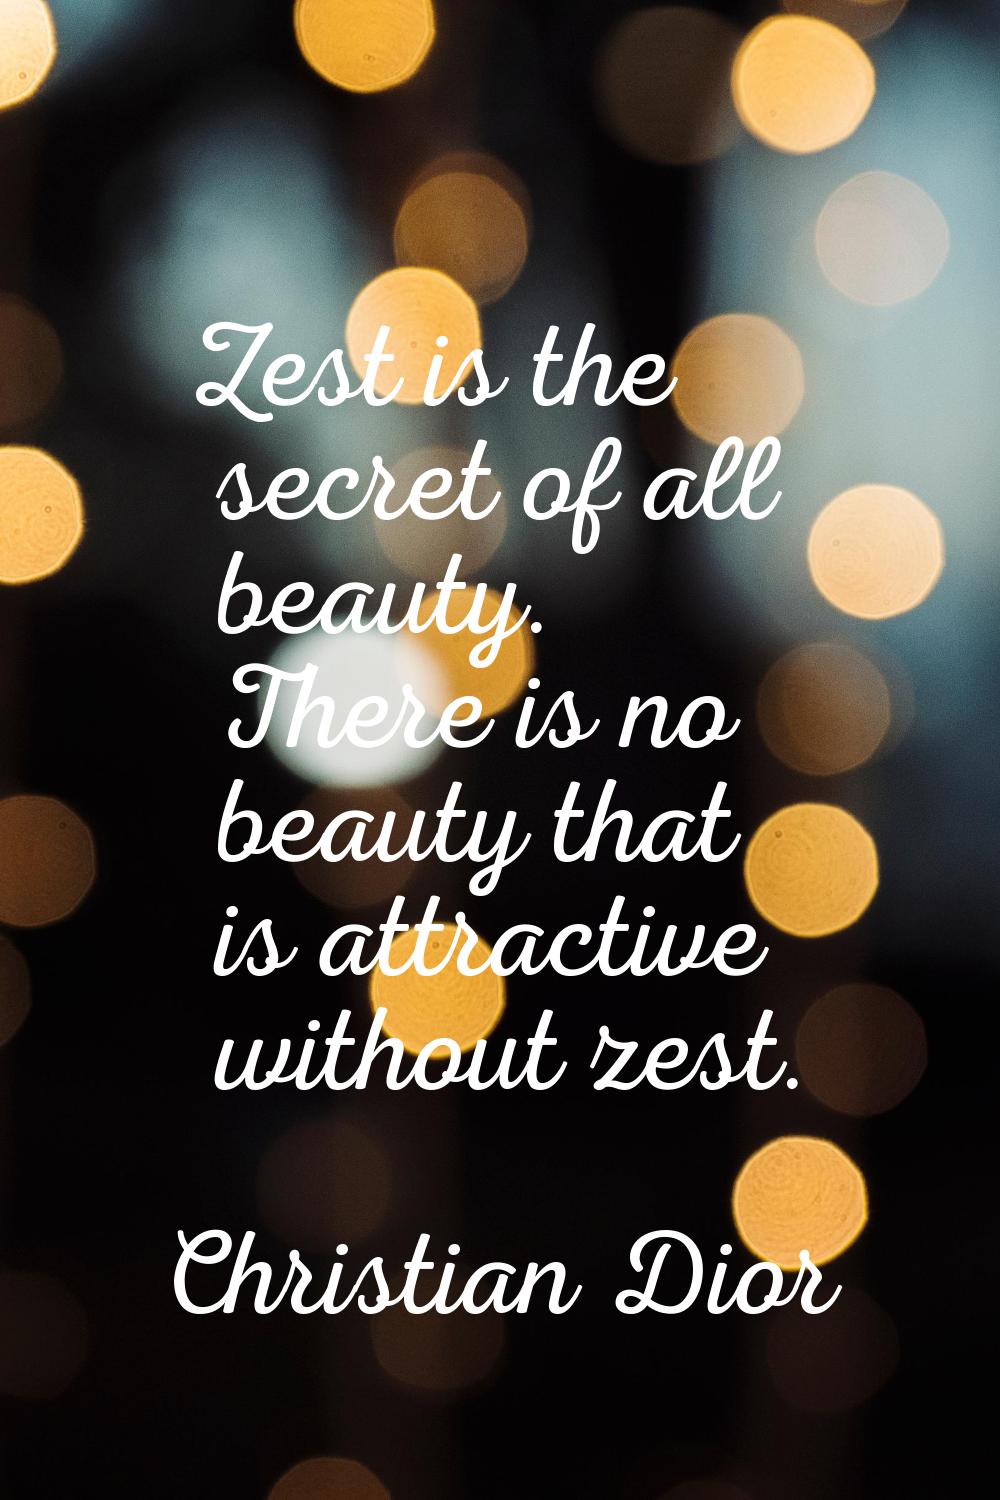 Zest is the secret of all beauty. There is no beauty that is attractive without zest.